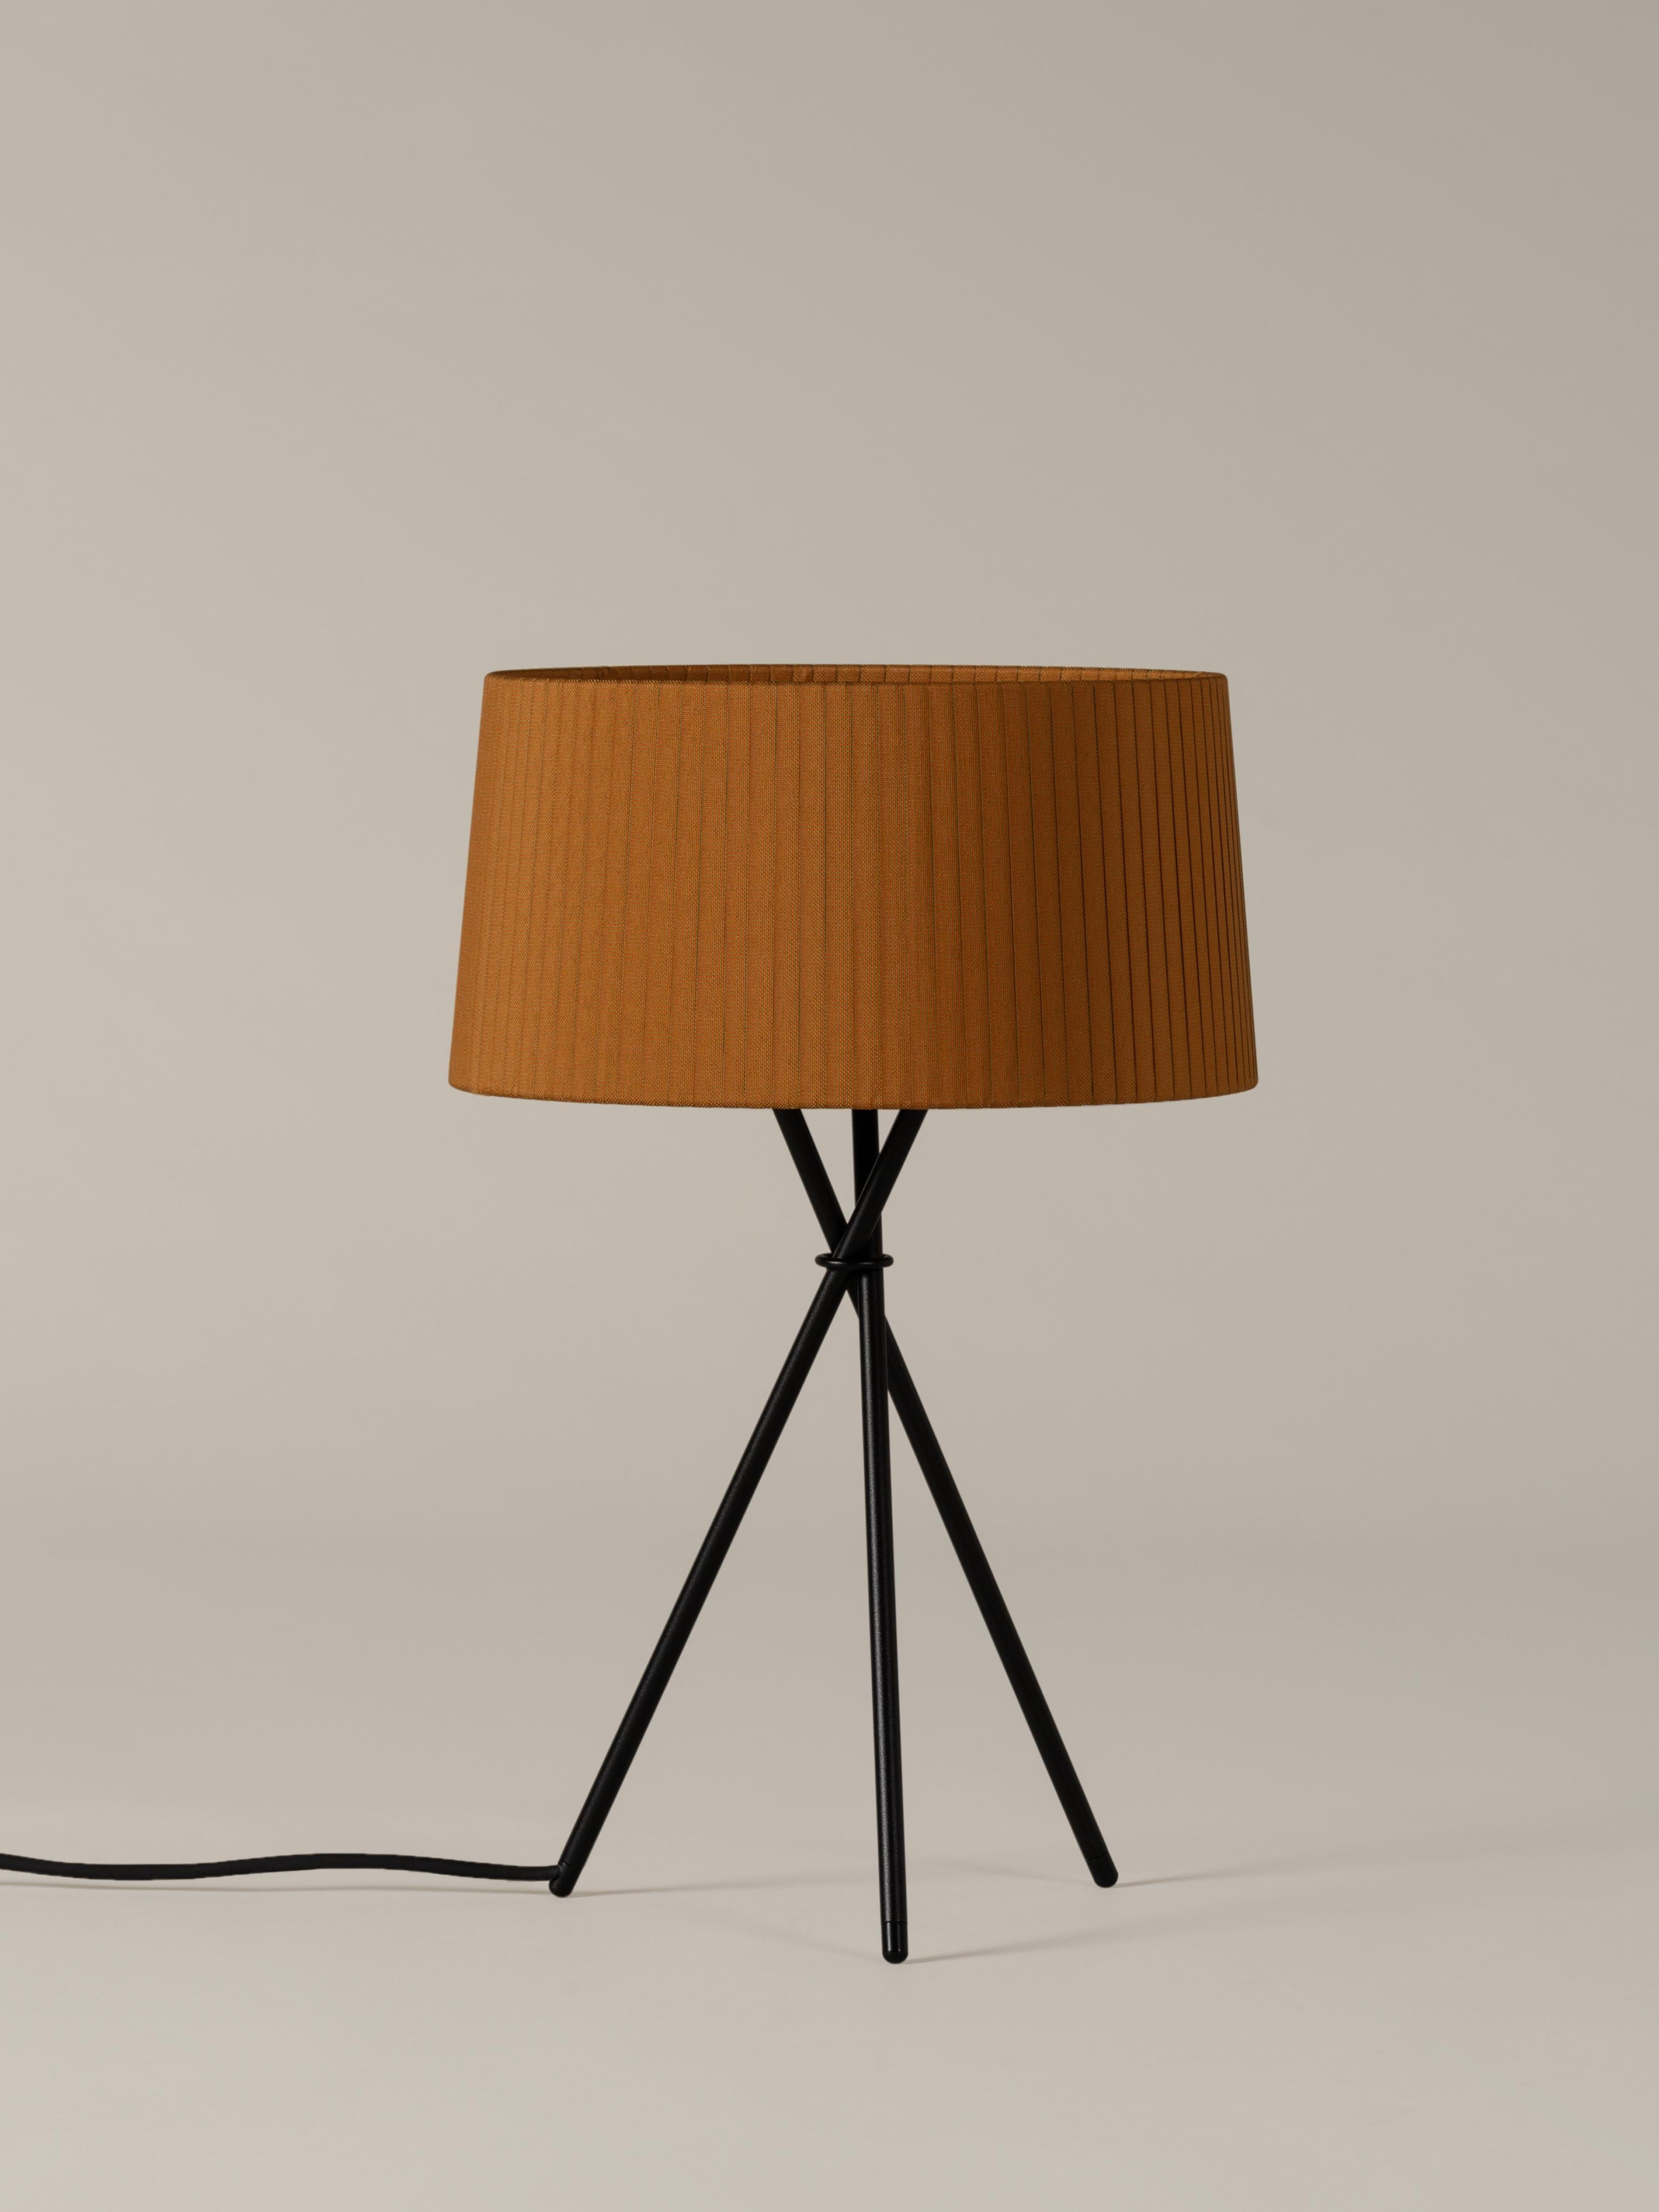 Mustard Trípode M3 table lamp by Santa & Cole
Dimensions: D 31 x H 50 cm
Materials: Metal, ribbon.
Available in other colors.

Trípode humanises neutral spaces with its colorful and functional sobriety. The shade is hand ribboned and its base